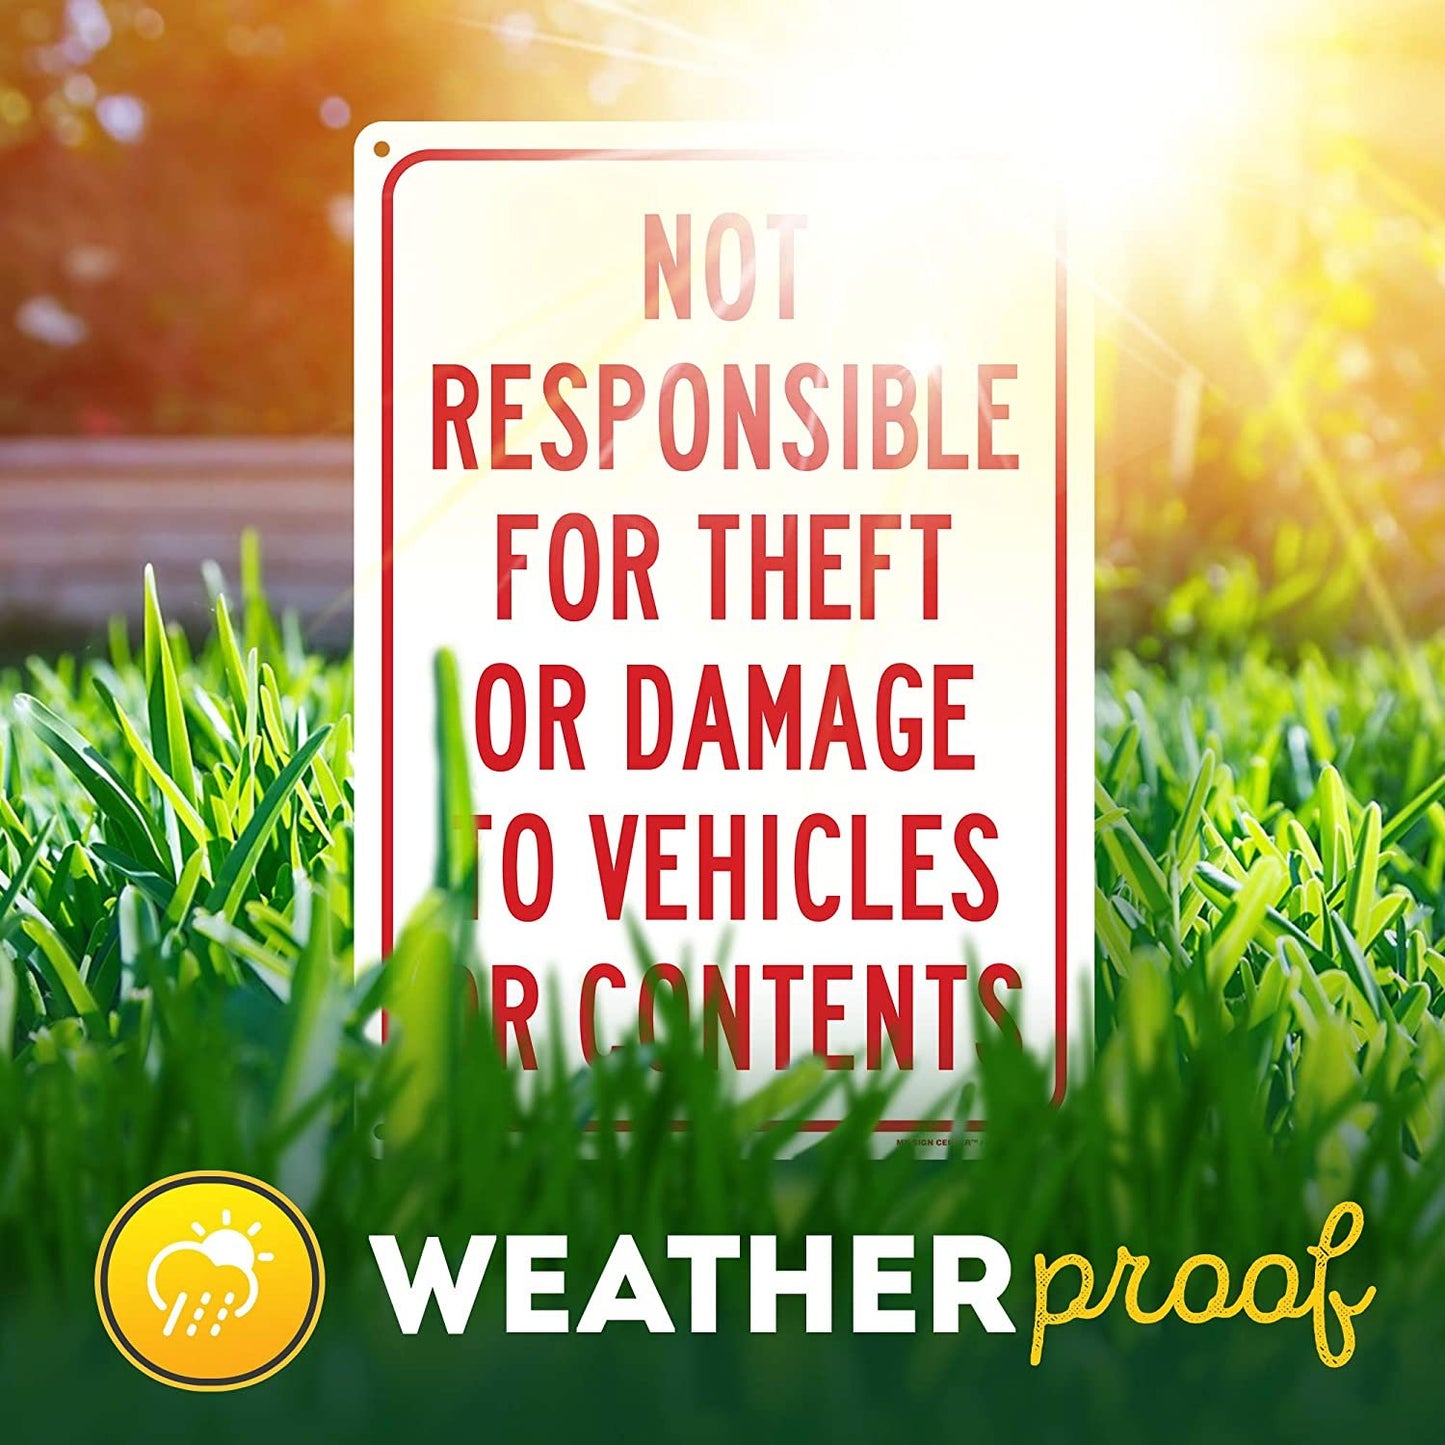 Not Responsible for Theft Or Damage Sign to Vehicles or Content